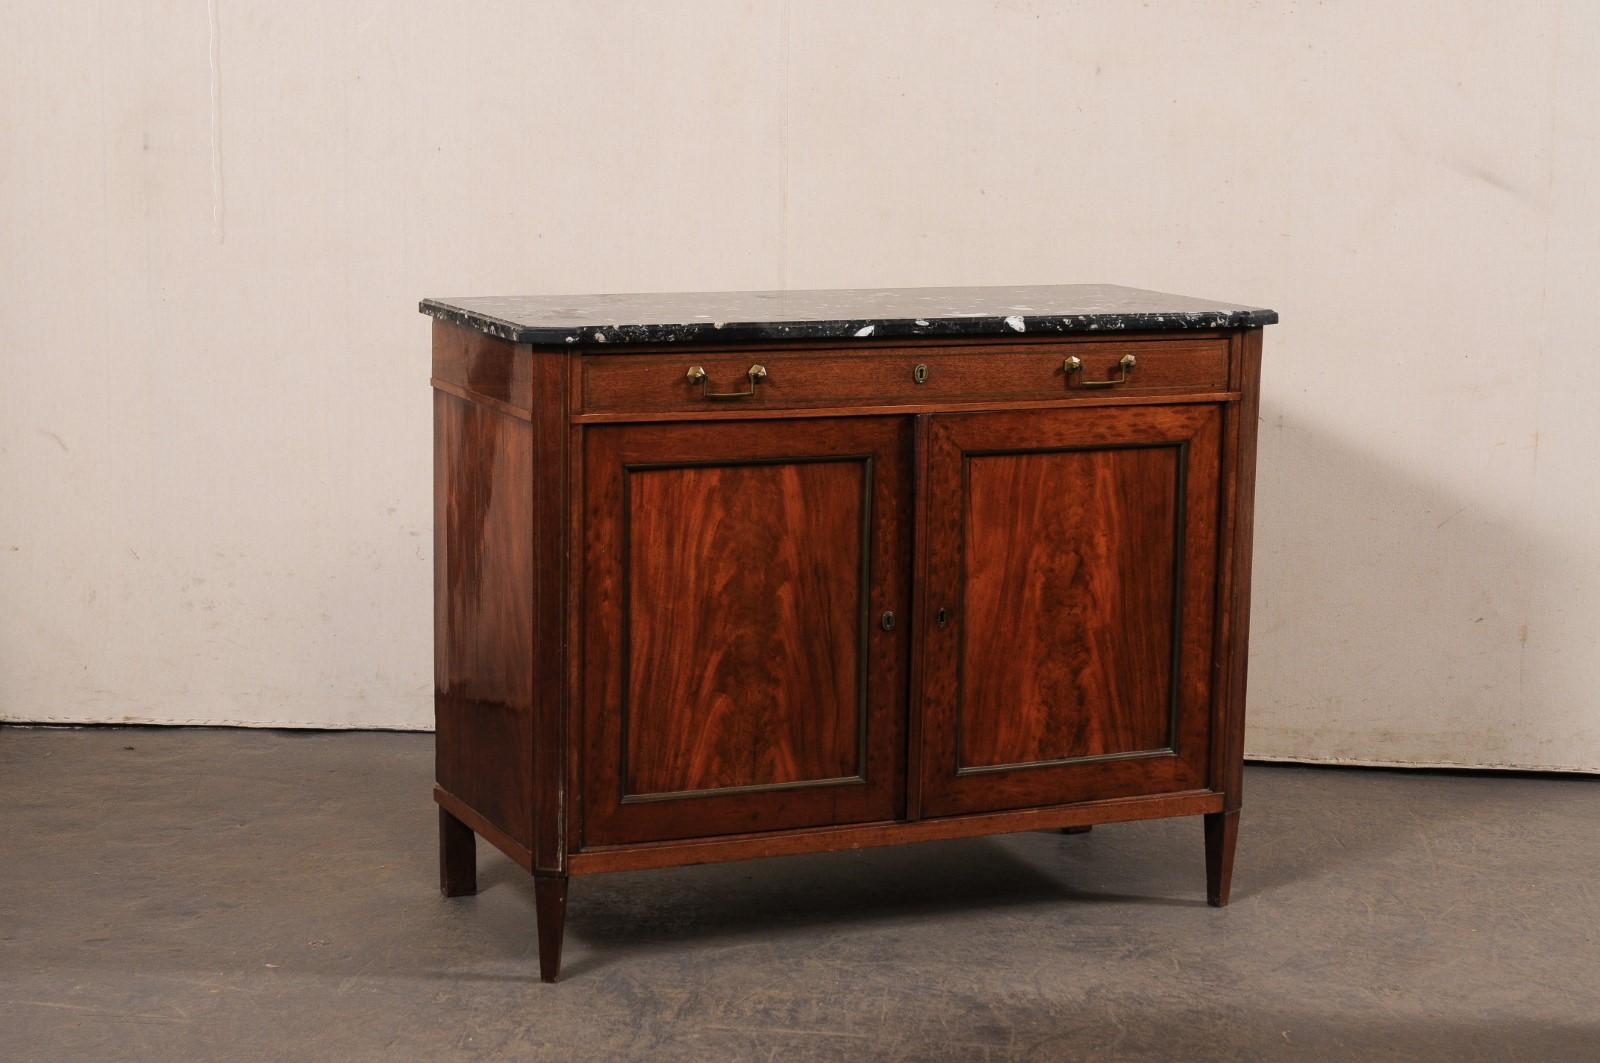 A French wooden buffet console, with really nice marble top, from the 19th century. This antique chest from France (just over four feet in length) features a rectangular-shaped black marble top with pronounced and canted front corners, which rests